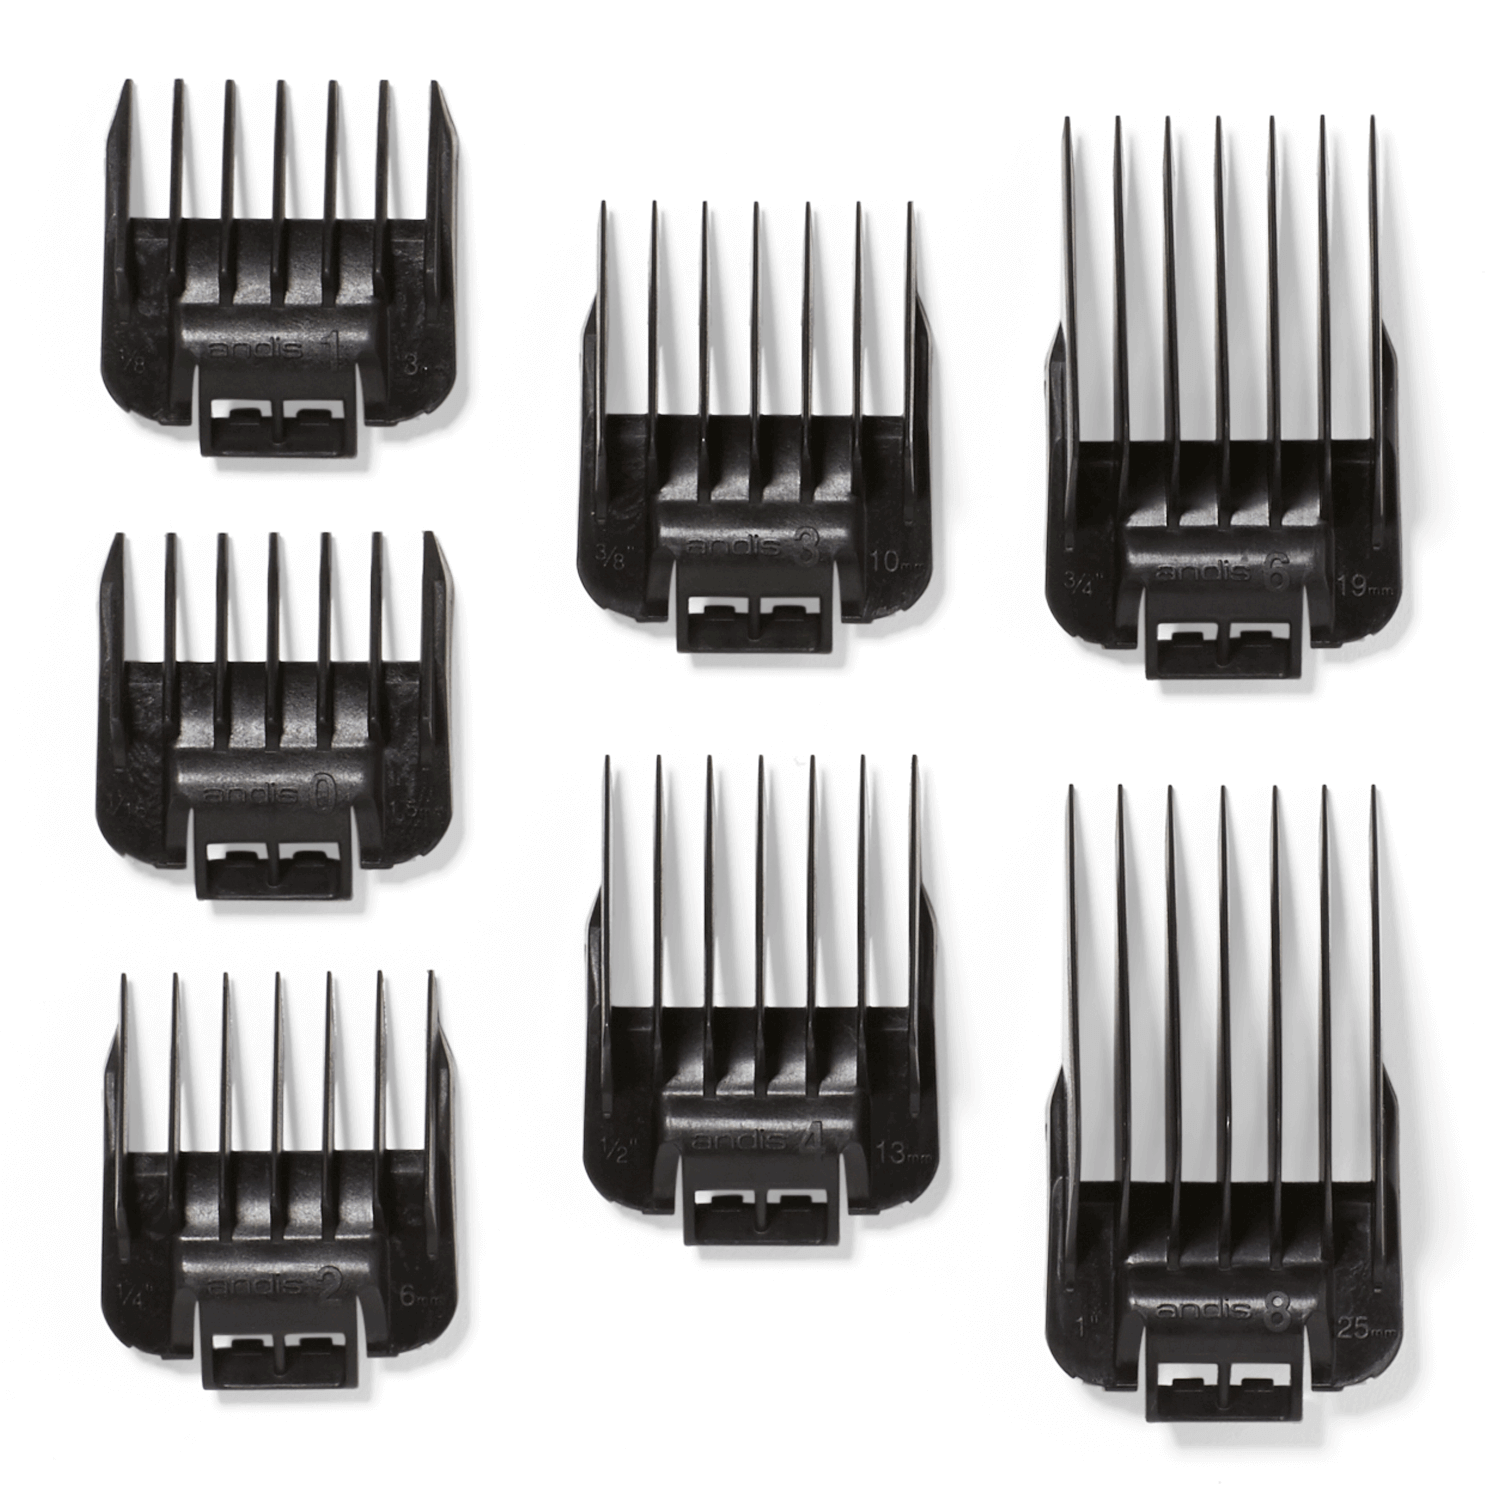 andis beard trimmer guards